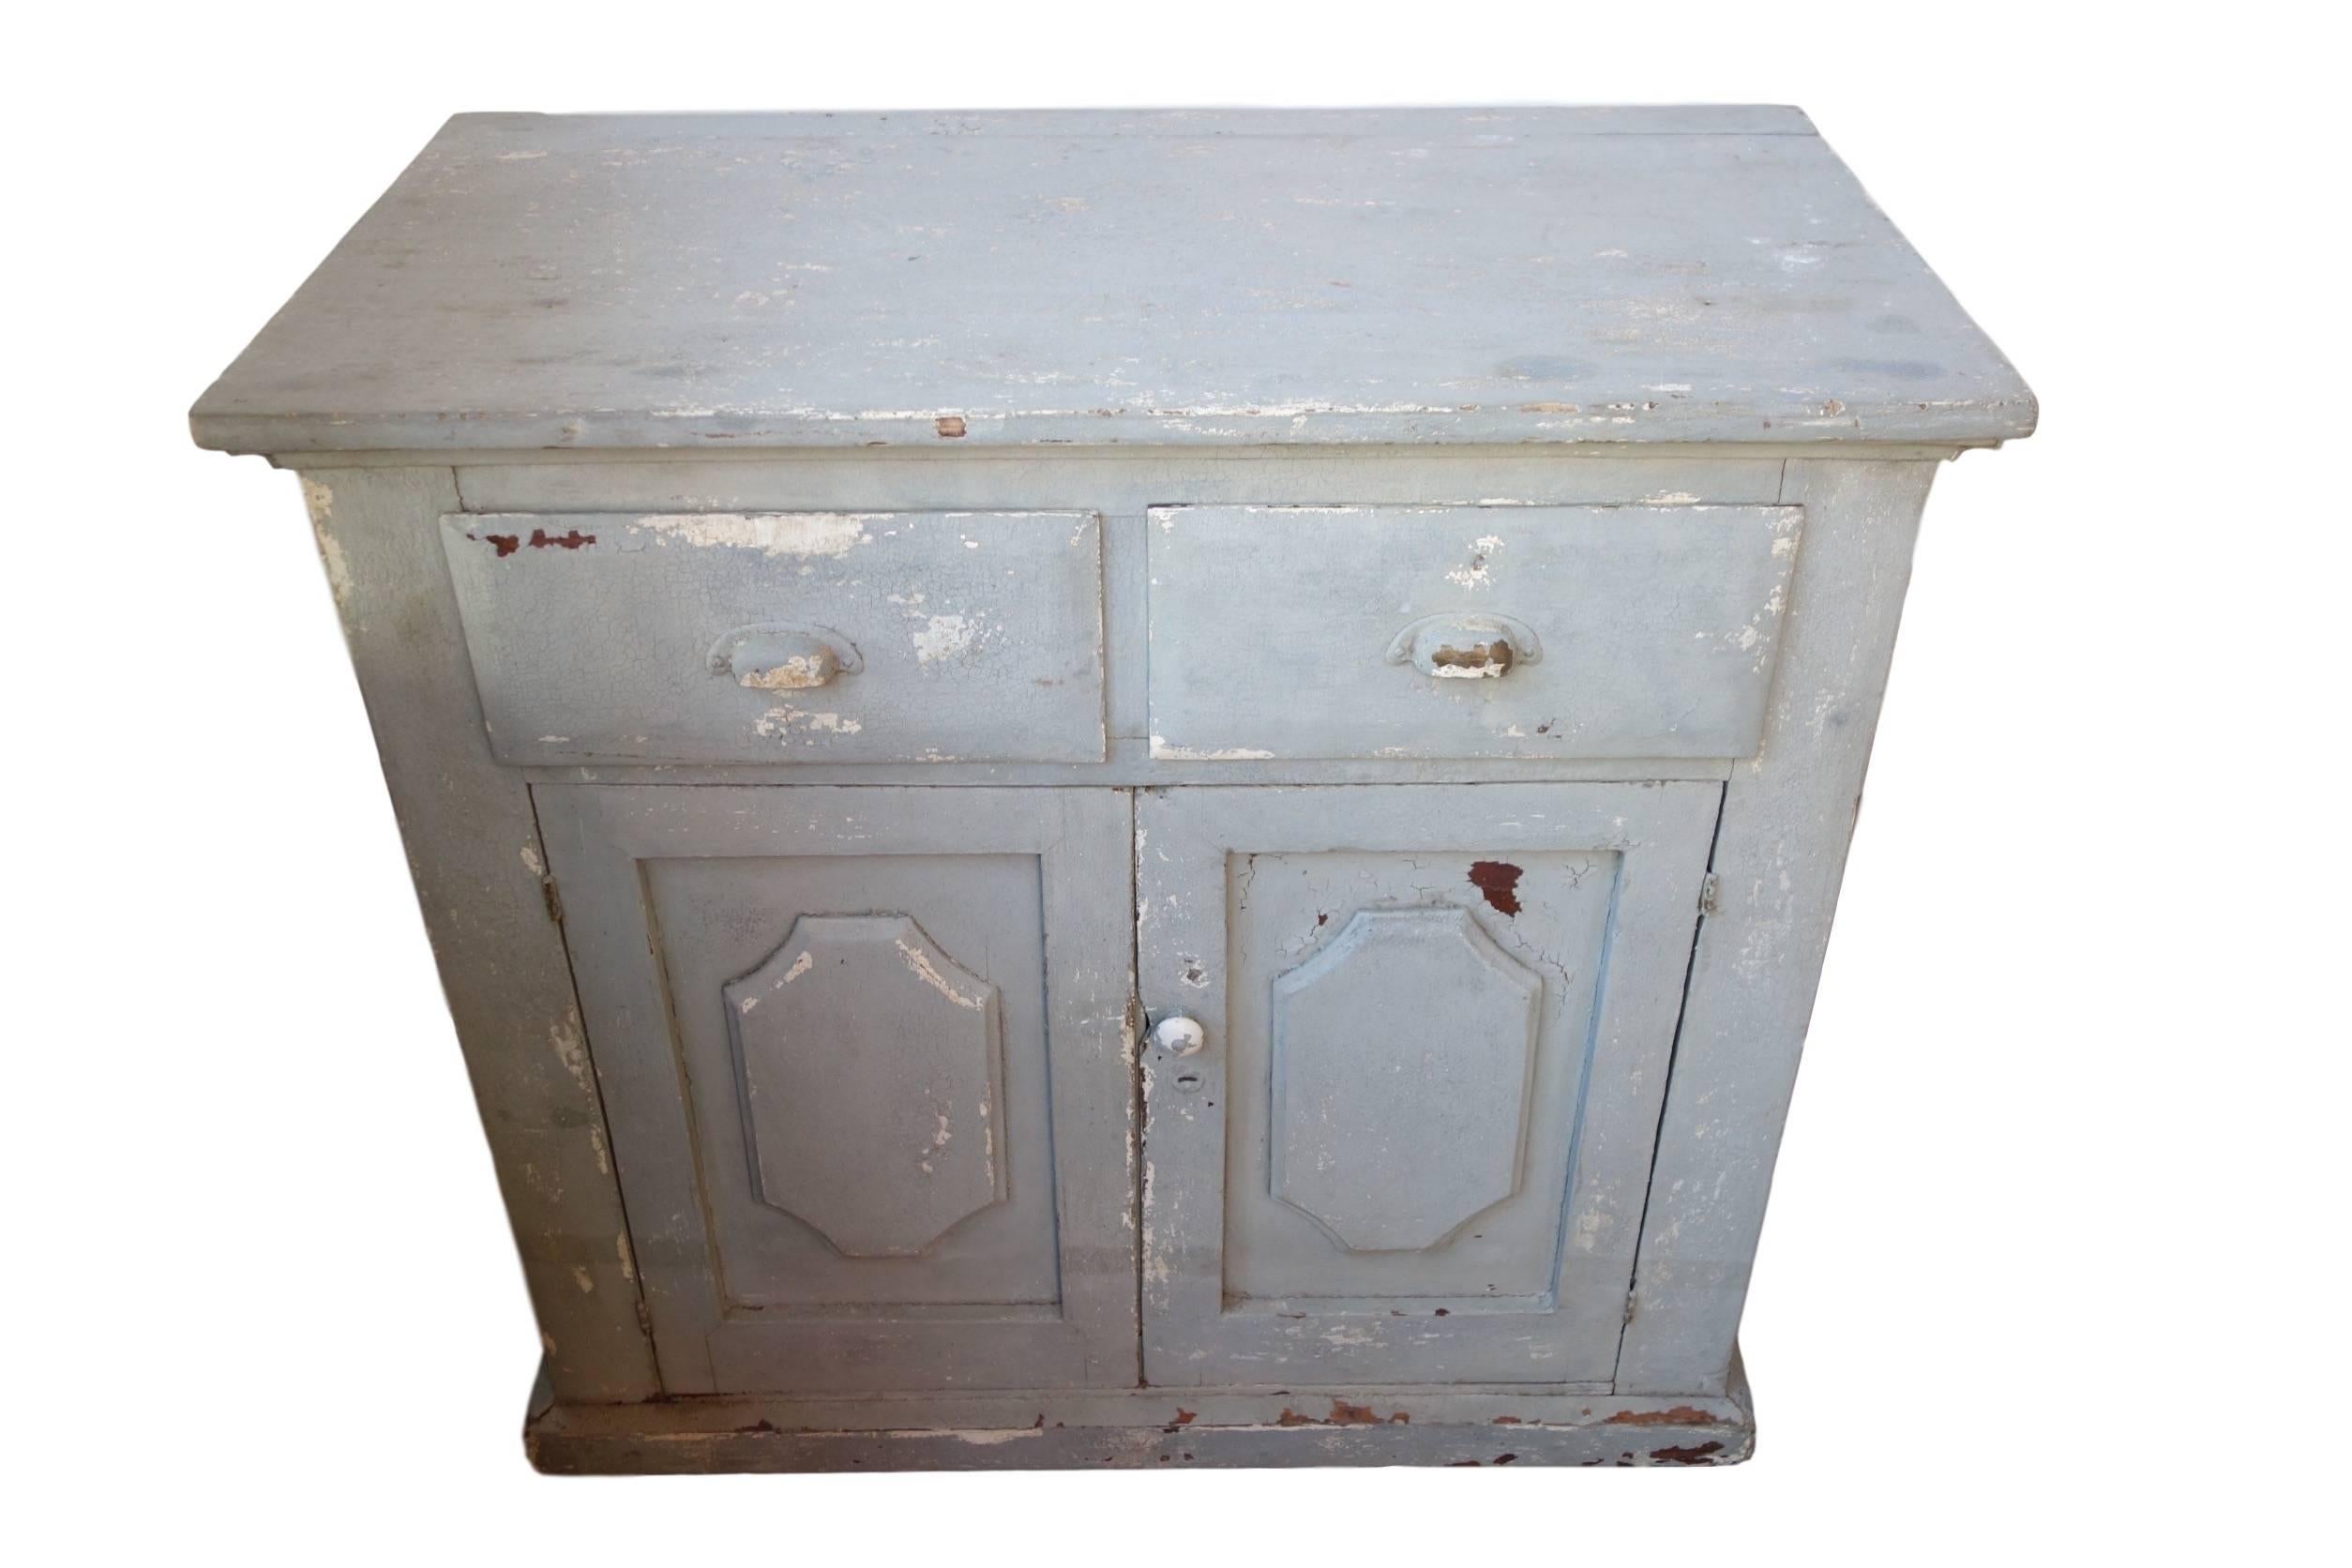 This is an early 20th century painted cabinet or dresser in its original blue/gray paint and all original hardware. This piece has plenty of storage with two drawers and a cabinet with an interior shelf. The bead board on the interior of the cabinet